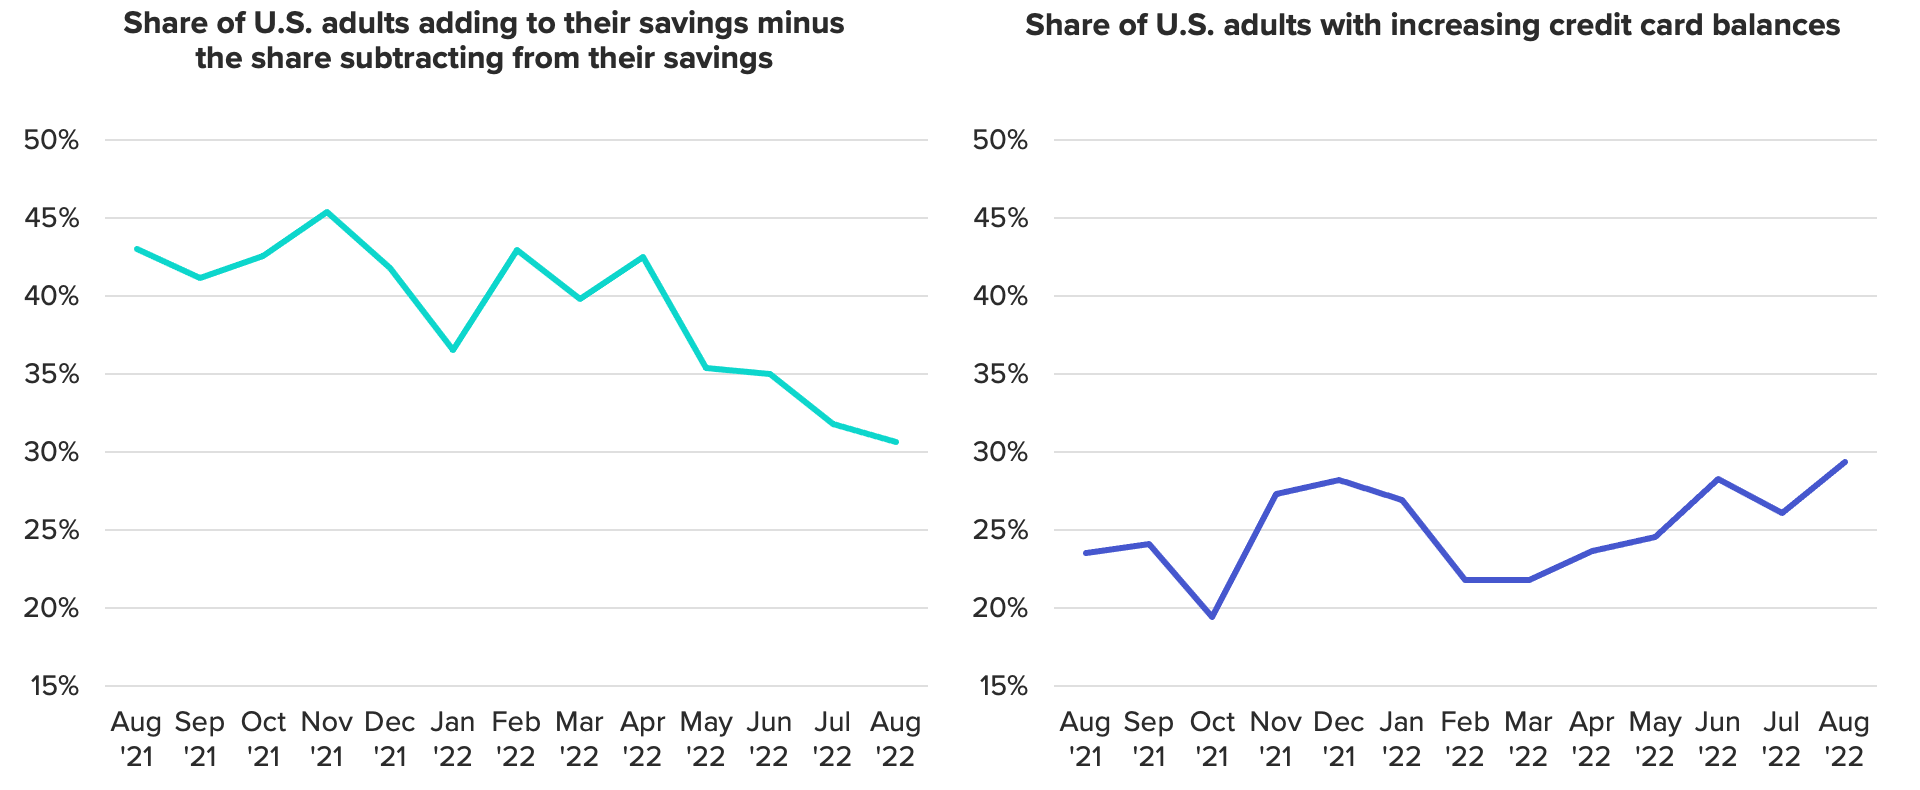 Line chart of the share of adults adding to savings minus the share subtracting from savings showing less consumers have money left over after paying their monthly expenses. Another line chart of the share of adults with increasing unpaid credit card balances showing that share climbed to its highest level since October 2020.